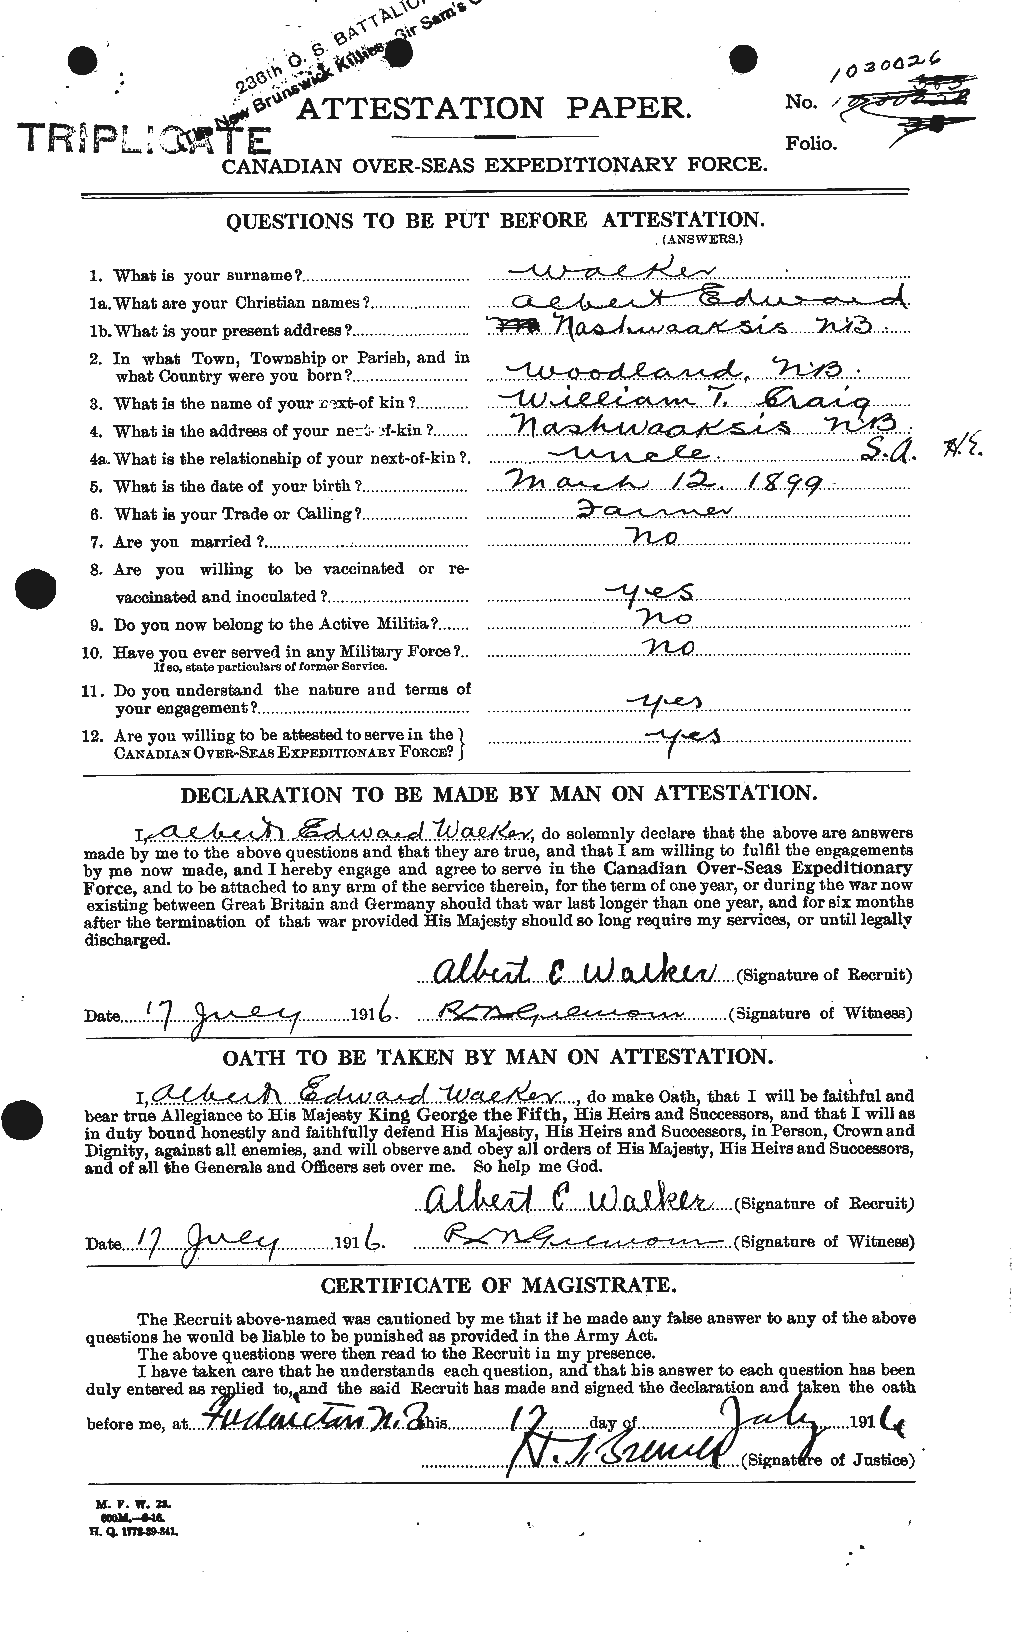 Personnel Records of the First World War - CEF 650975a